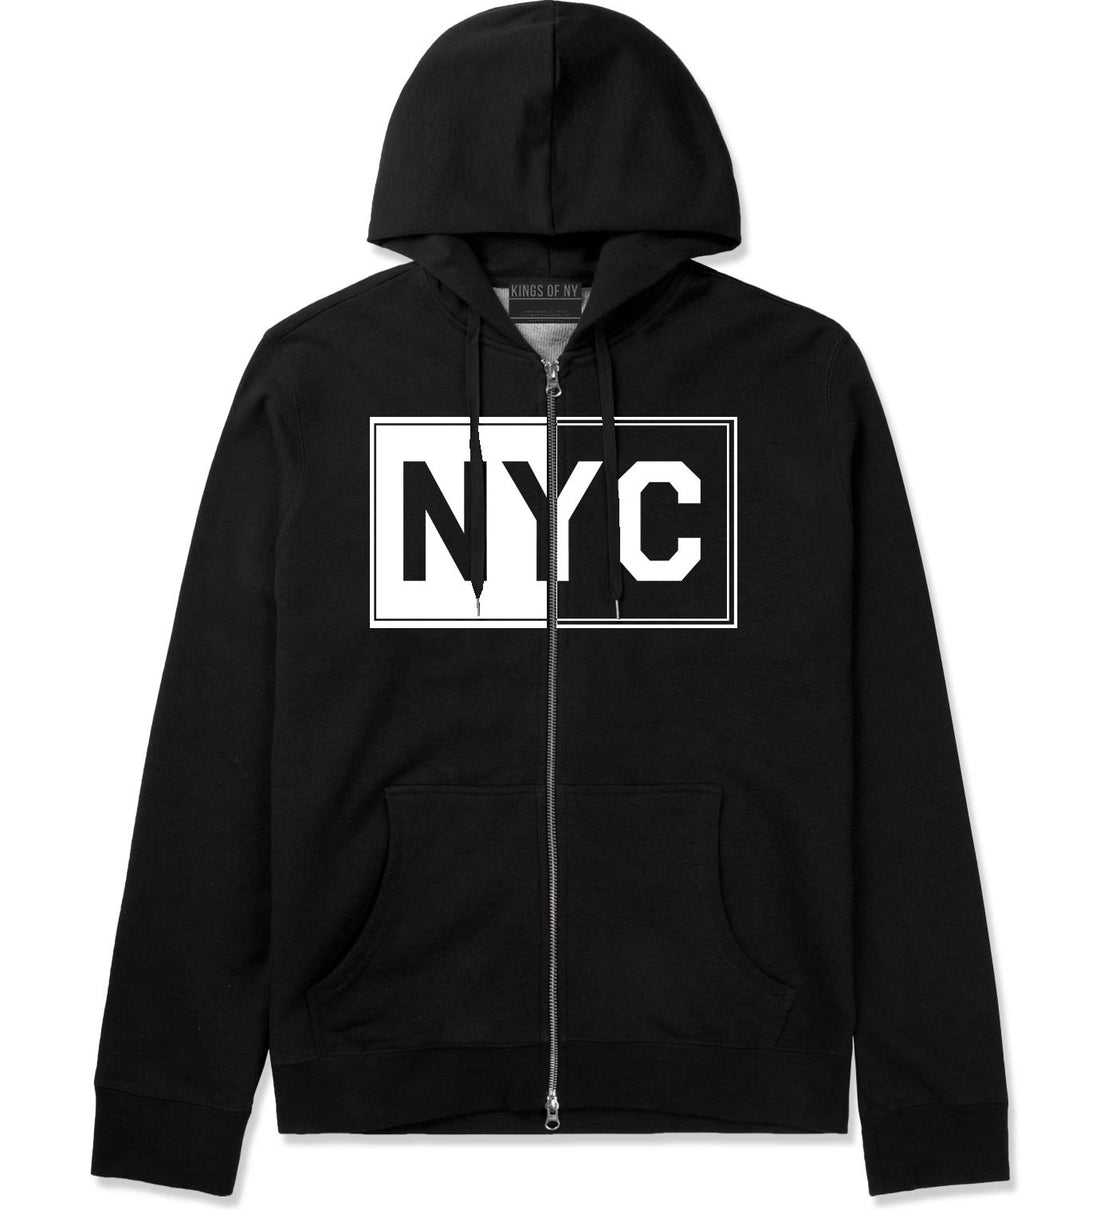 NYC Rectangle New York City Zip Up Hoodie in Black By Kings Of NY